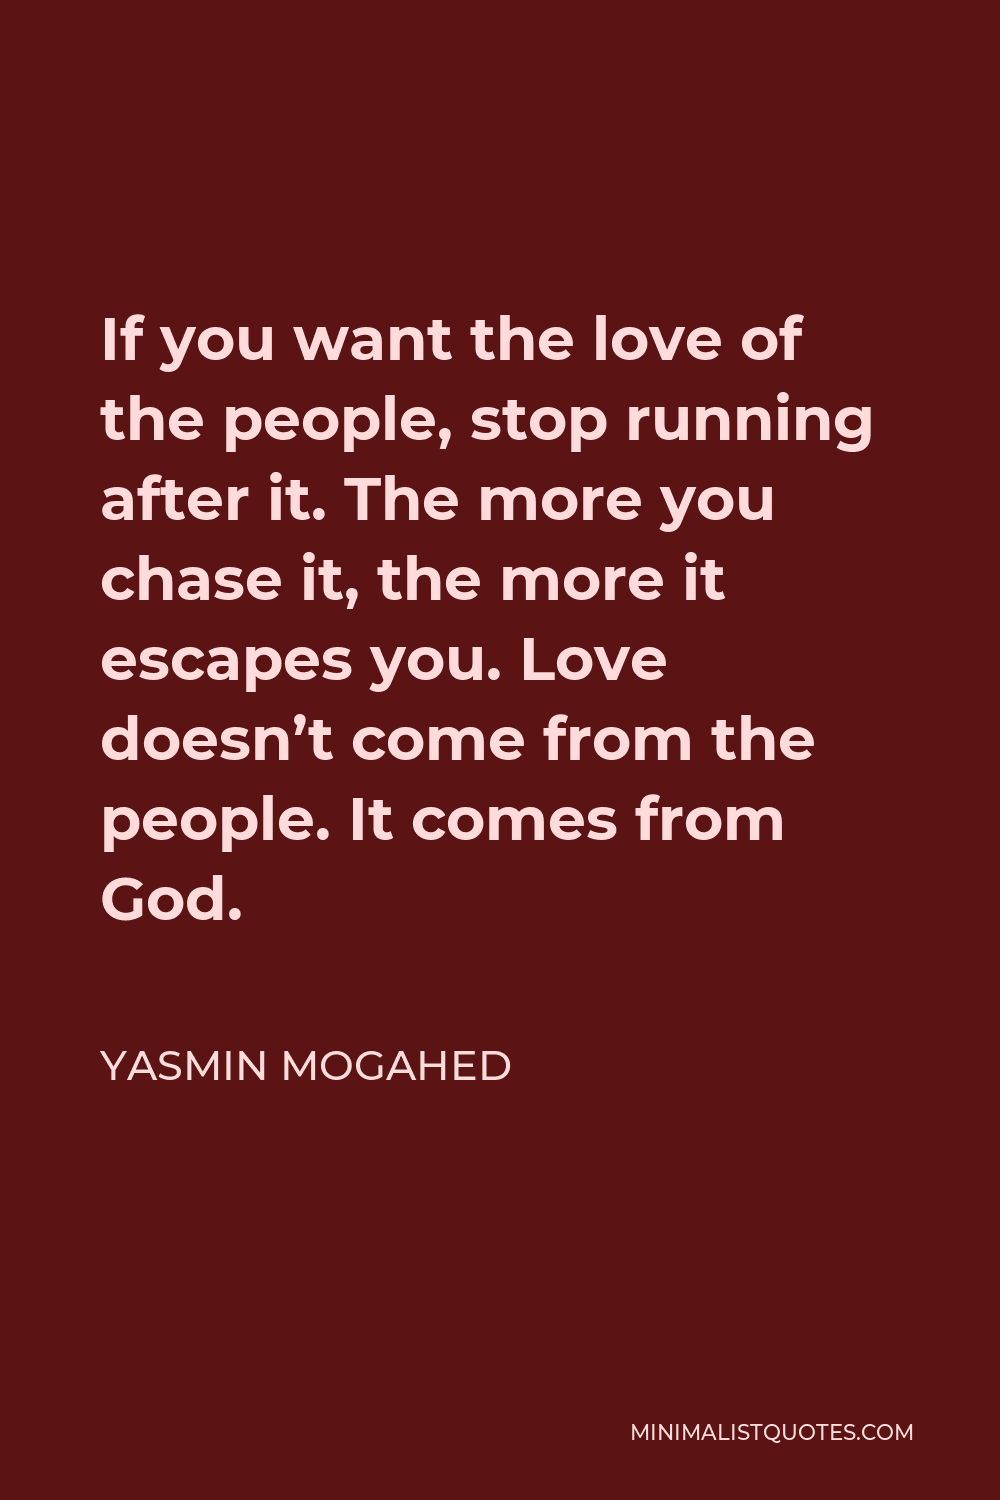 Yasmin Mogahed Quote: “Be grateful for the wound that pushes you